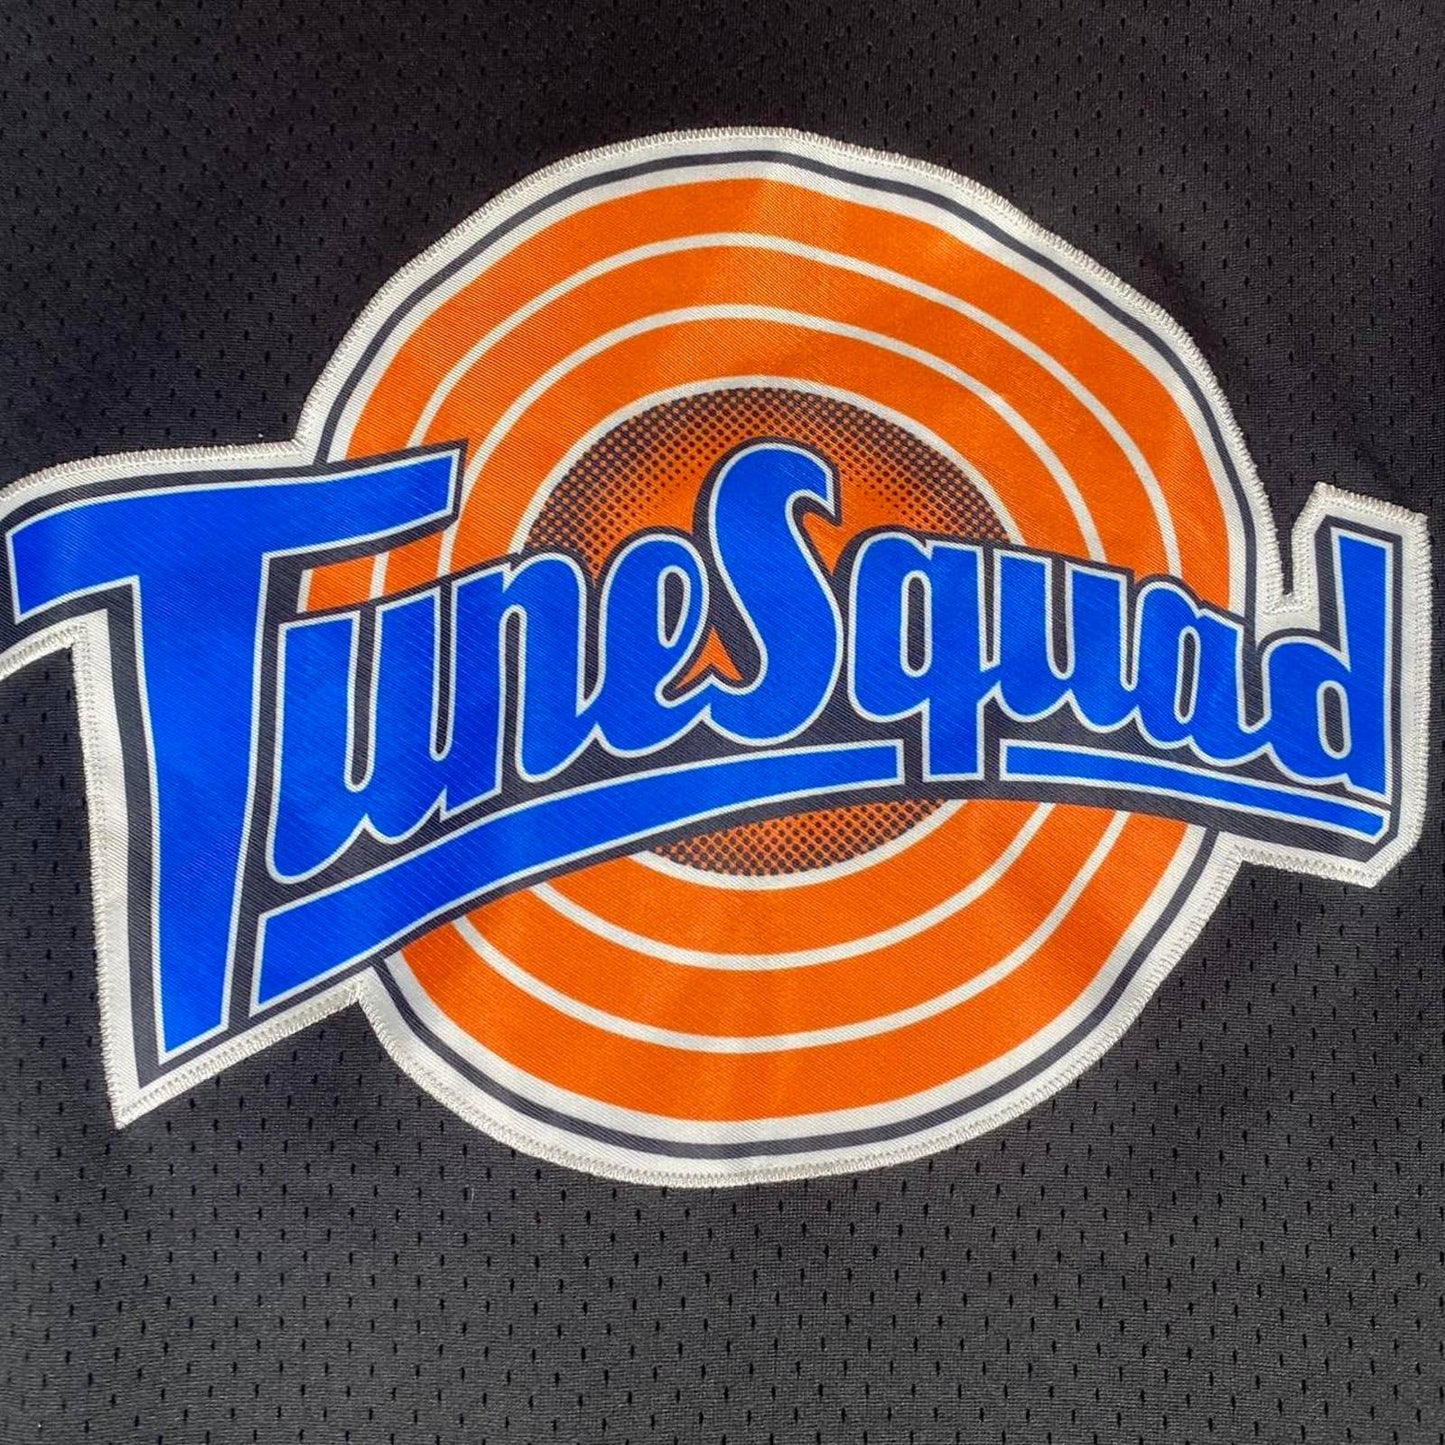 (S) Tune Squad Looney Tunes Basketball Jersey